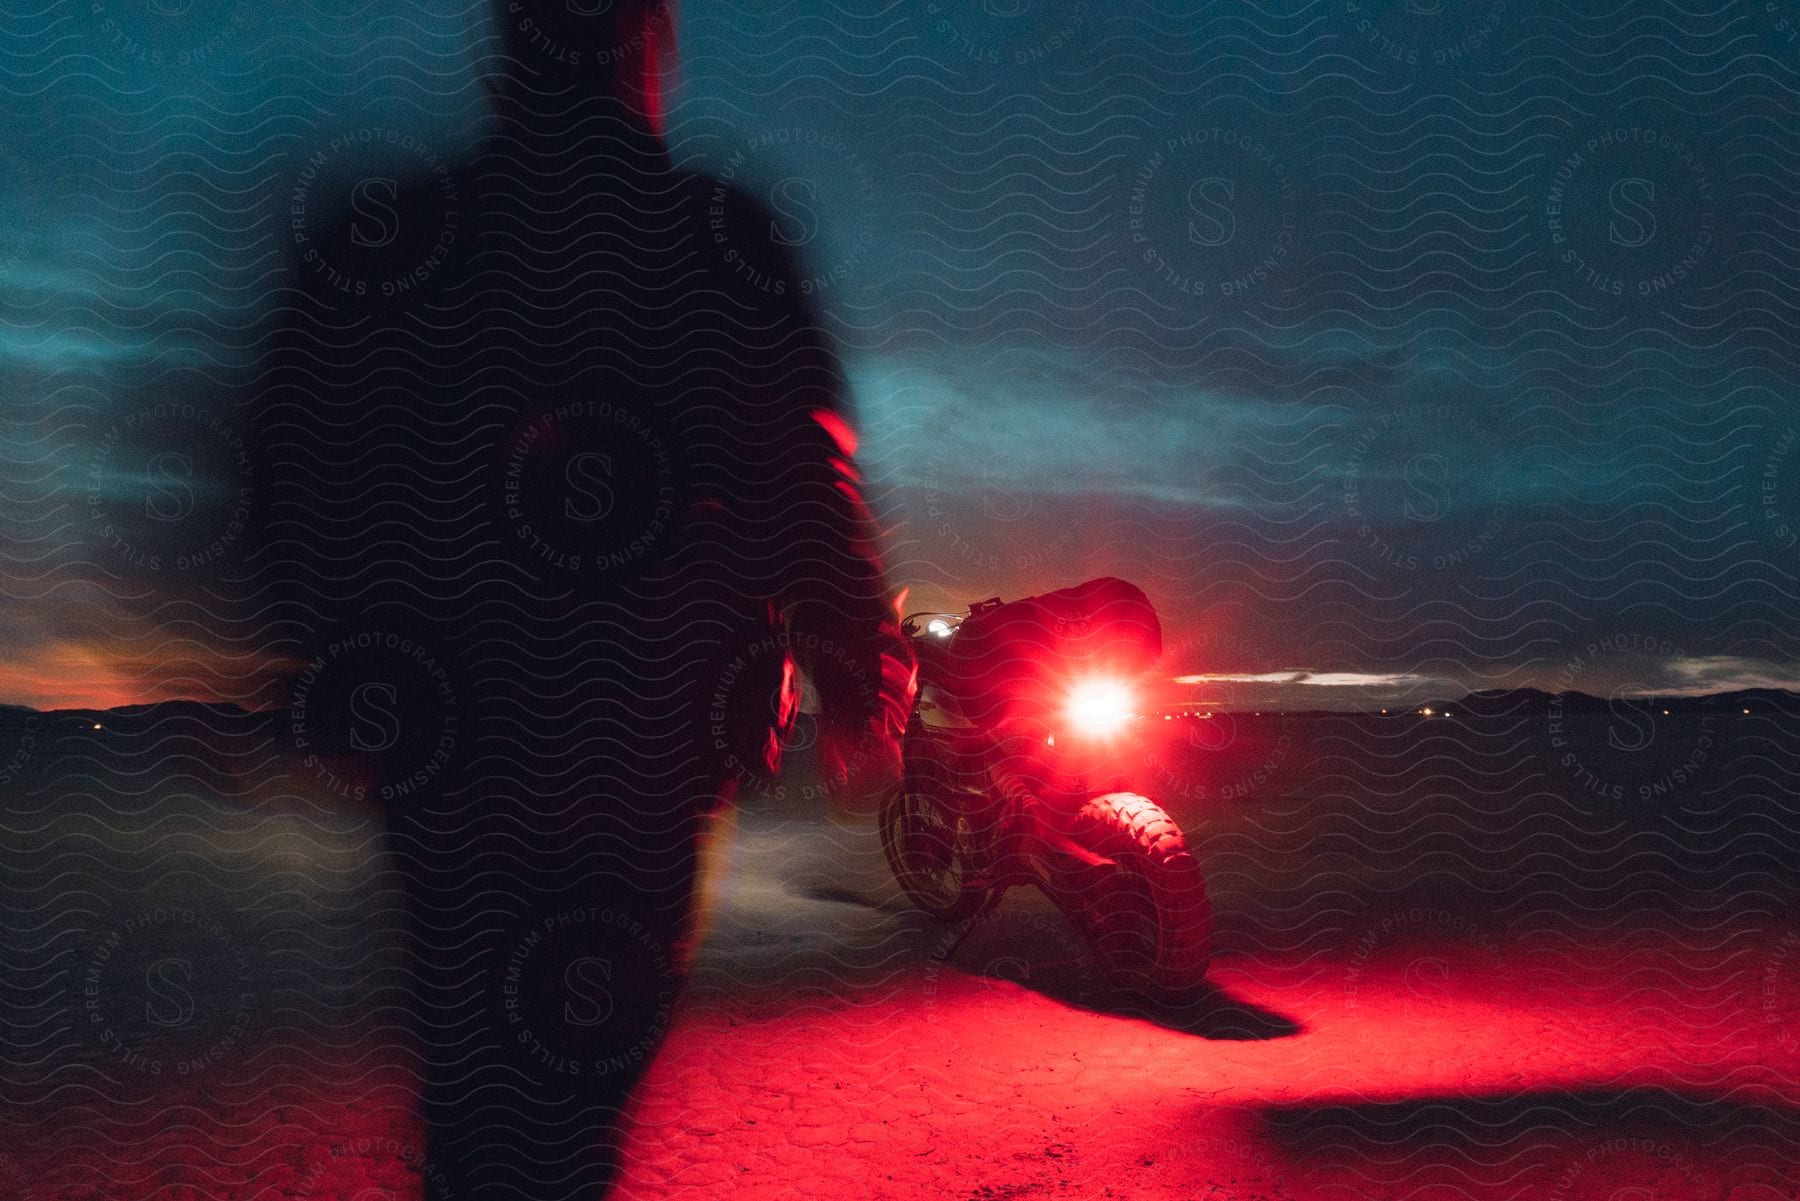 Silhouetted figure with motion blur walking toward a motorcycle with a bright red tail light, set against a dark desert landscape at twilight.